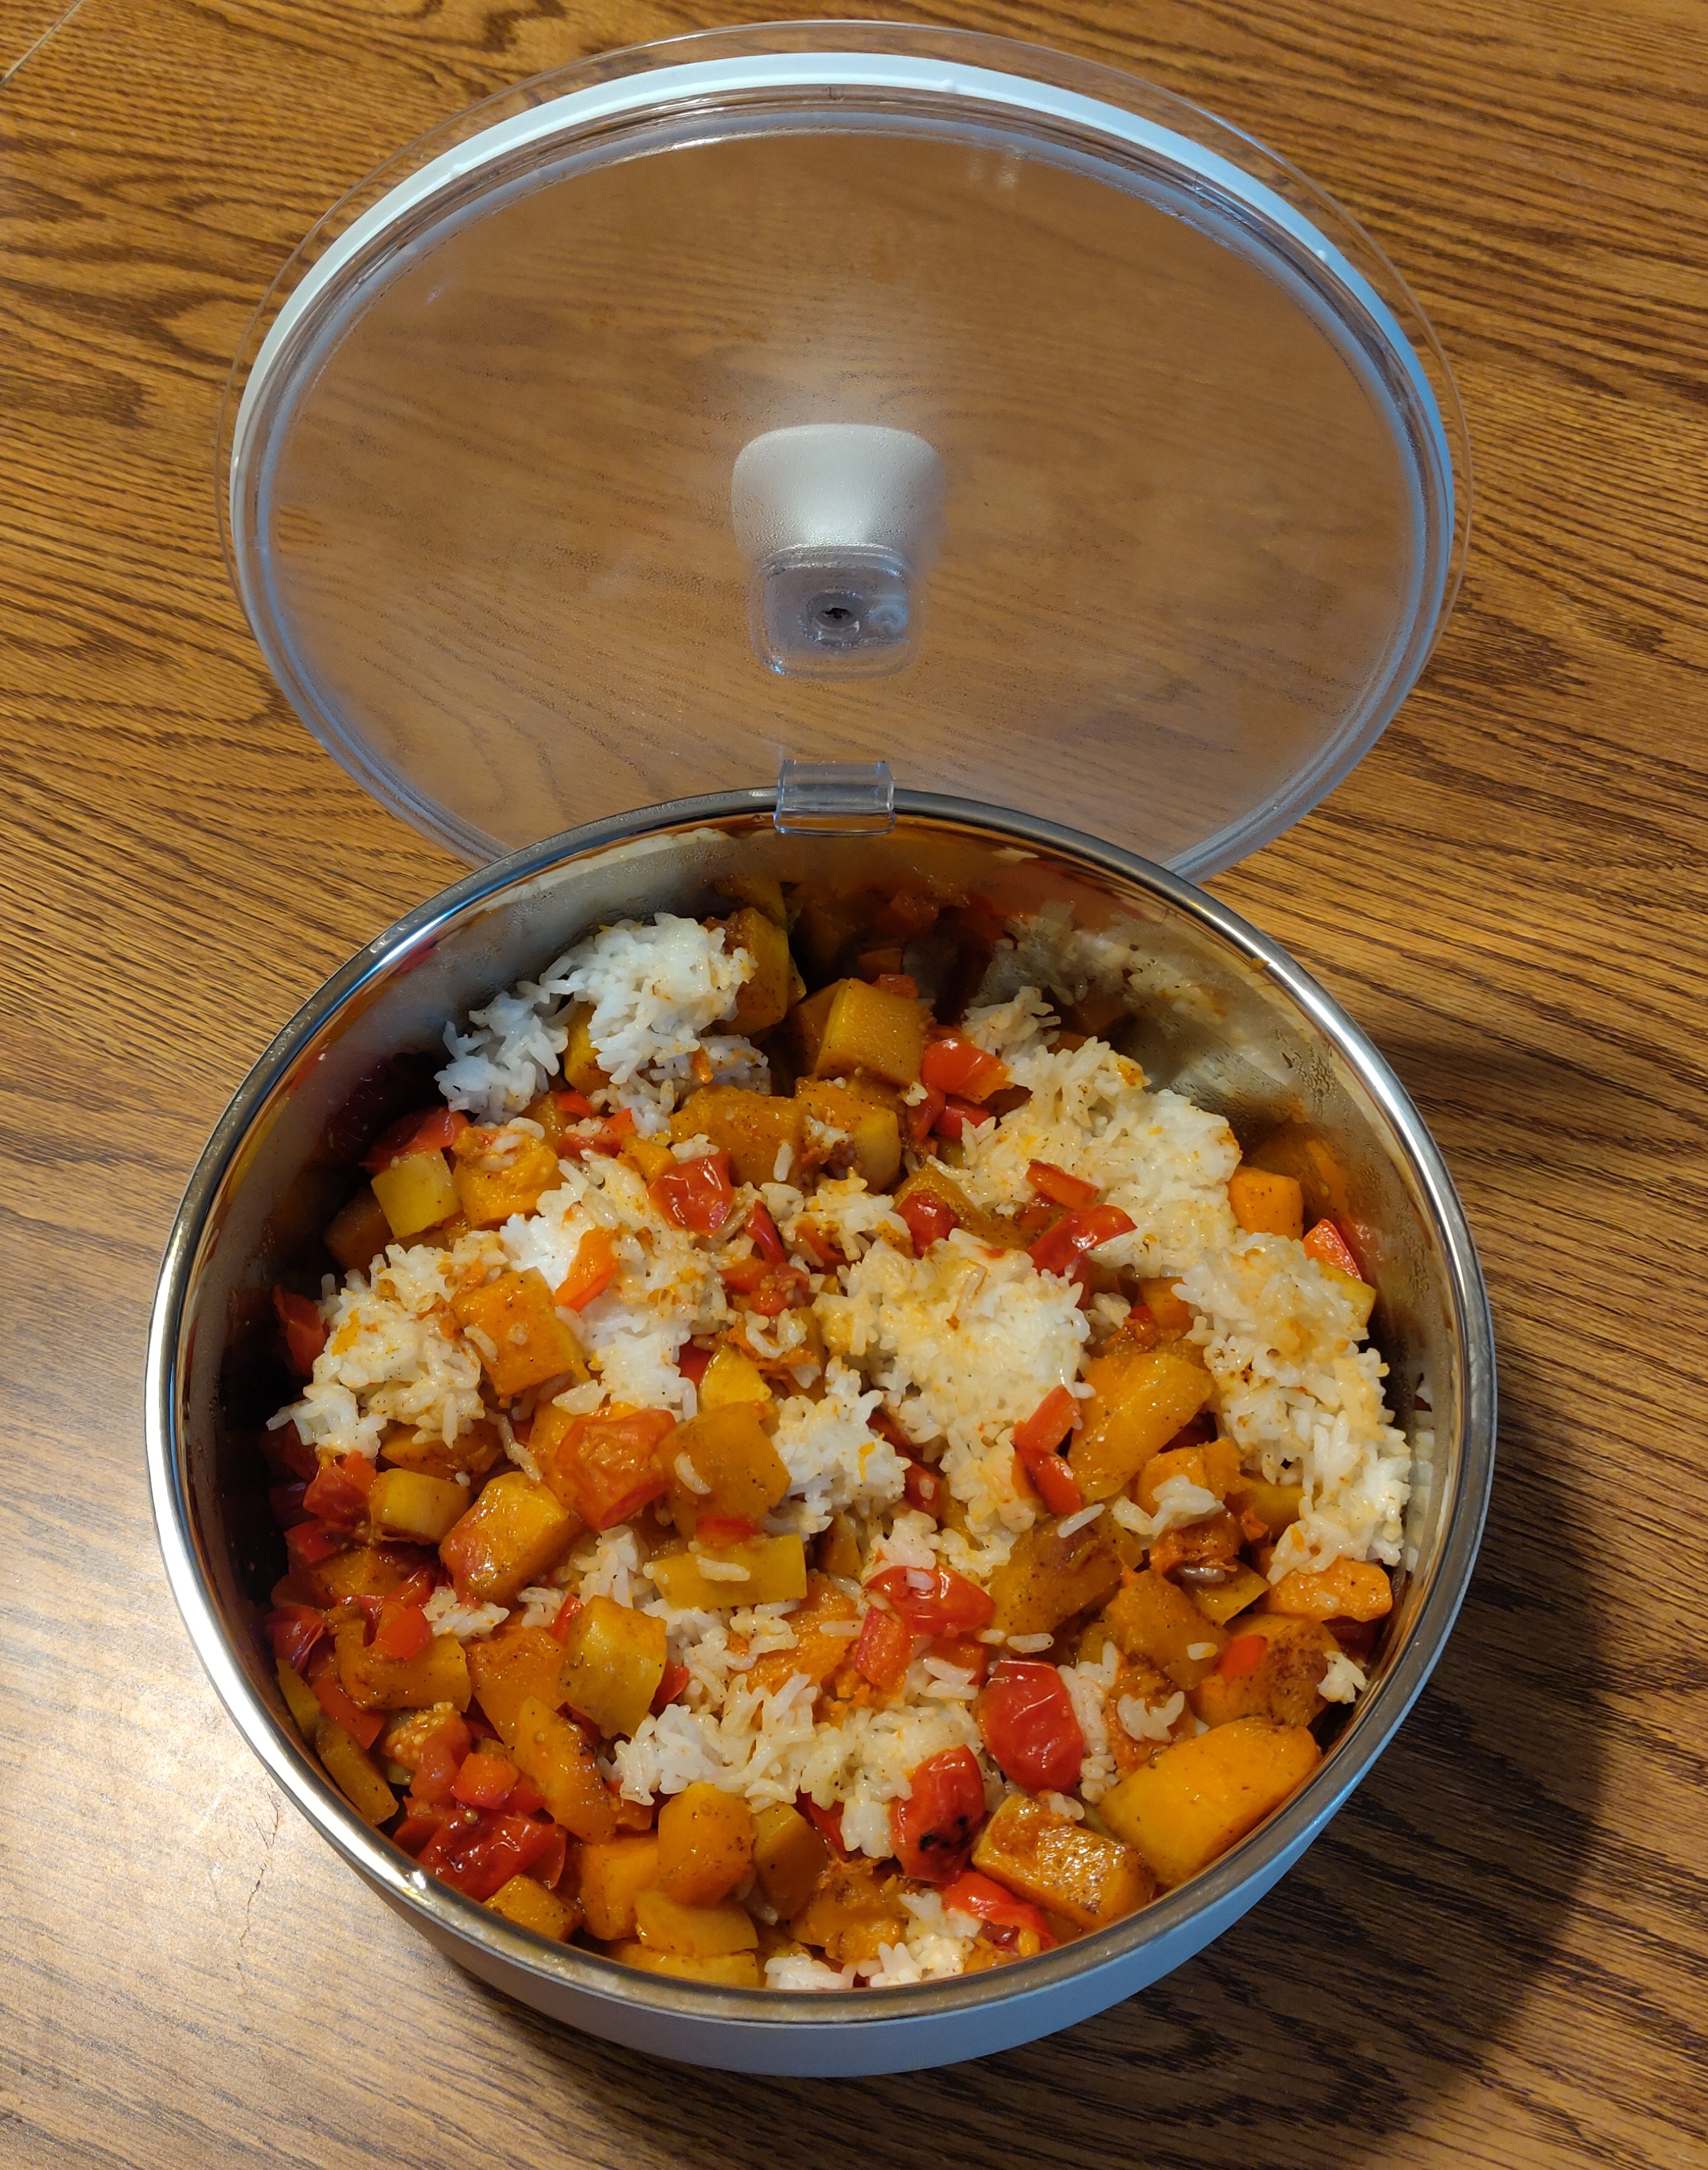 I ordered a set of the insulated serving bowls. This included a 2.5 QT and a 1 QT bowl. In this bowl I served roasted butternut squash, red pepper, and tomato mixed with rice. Yum!